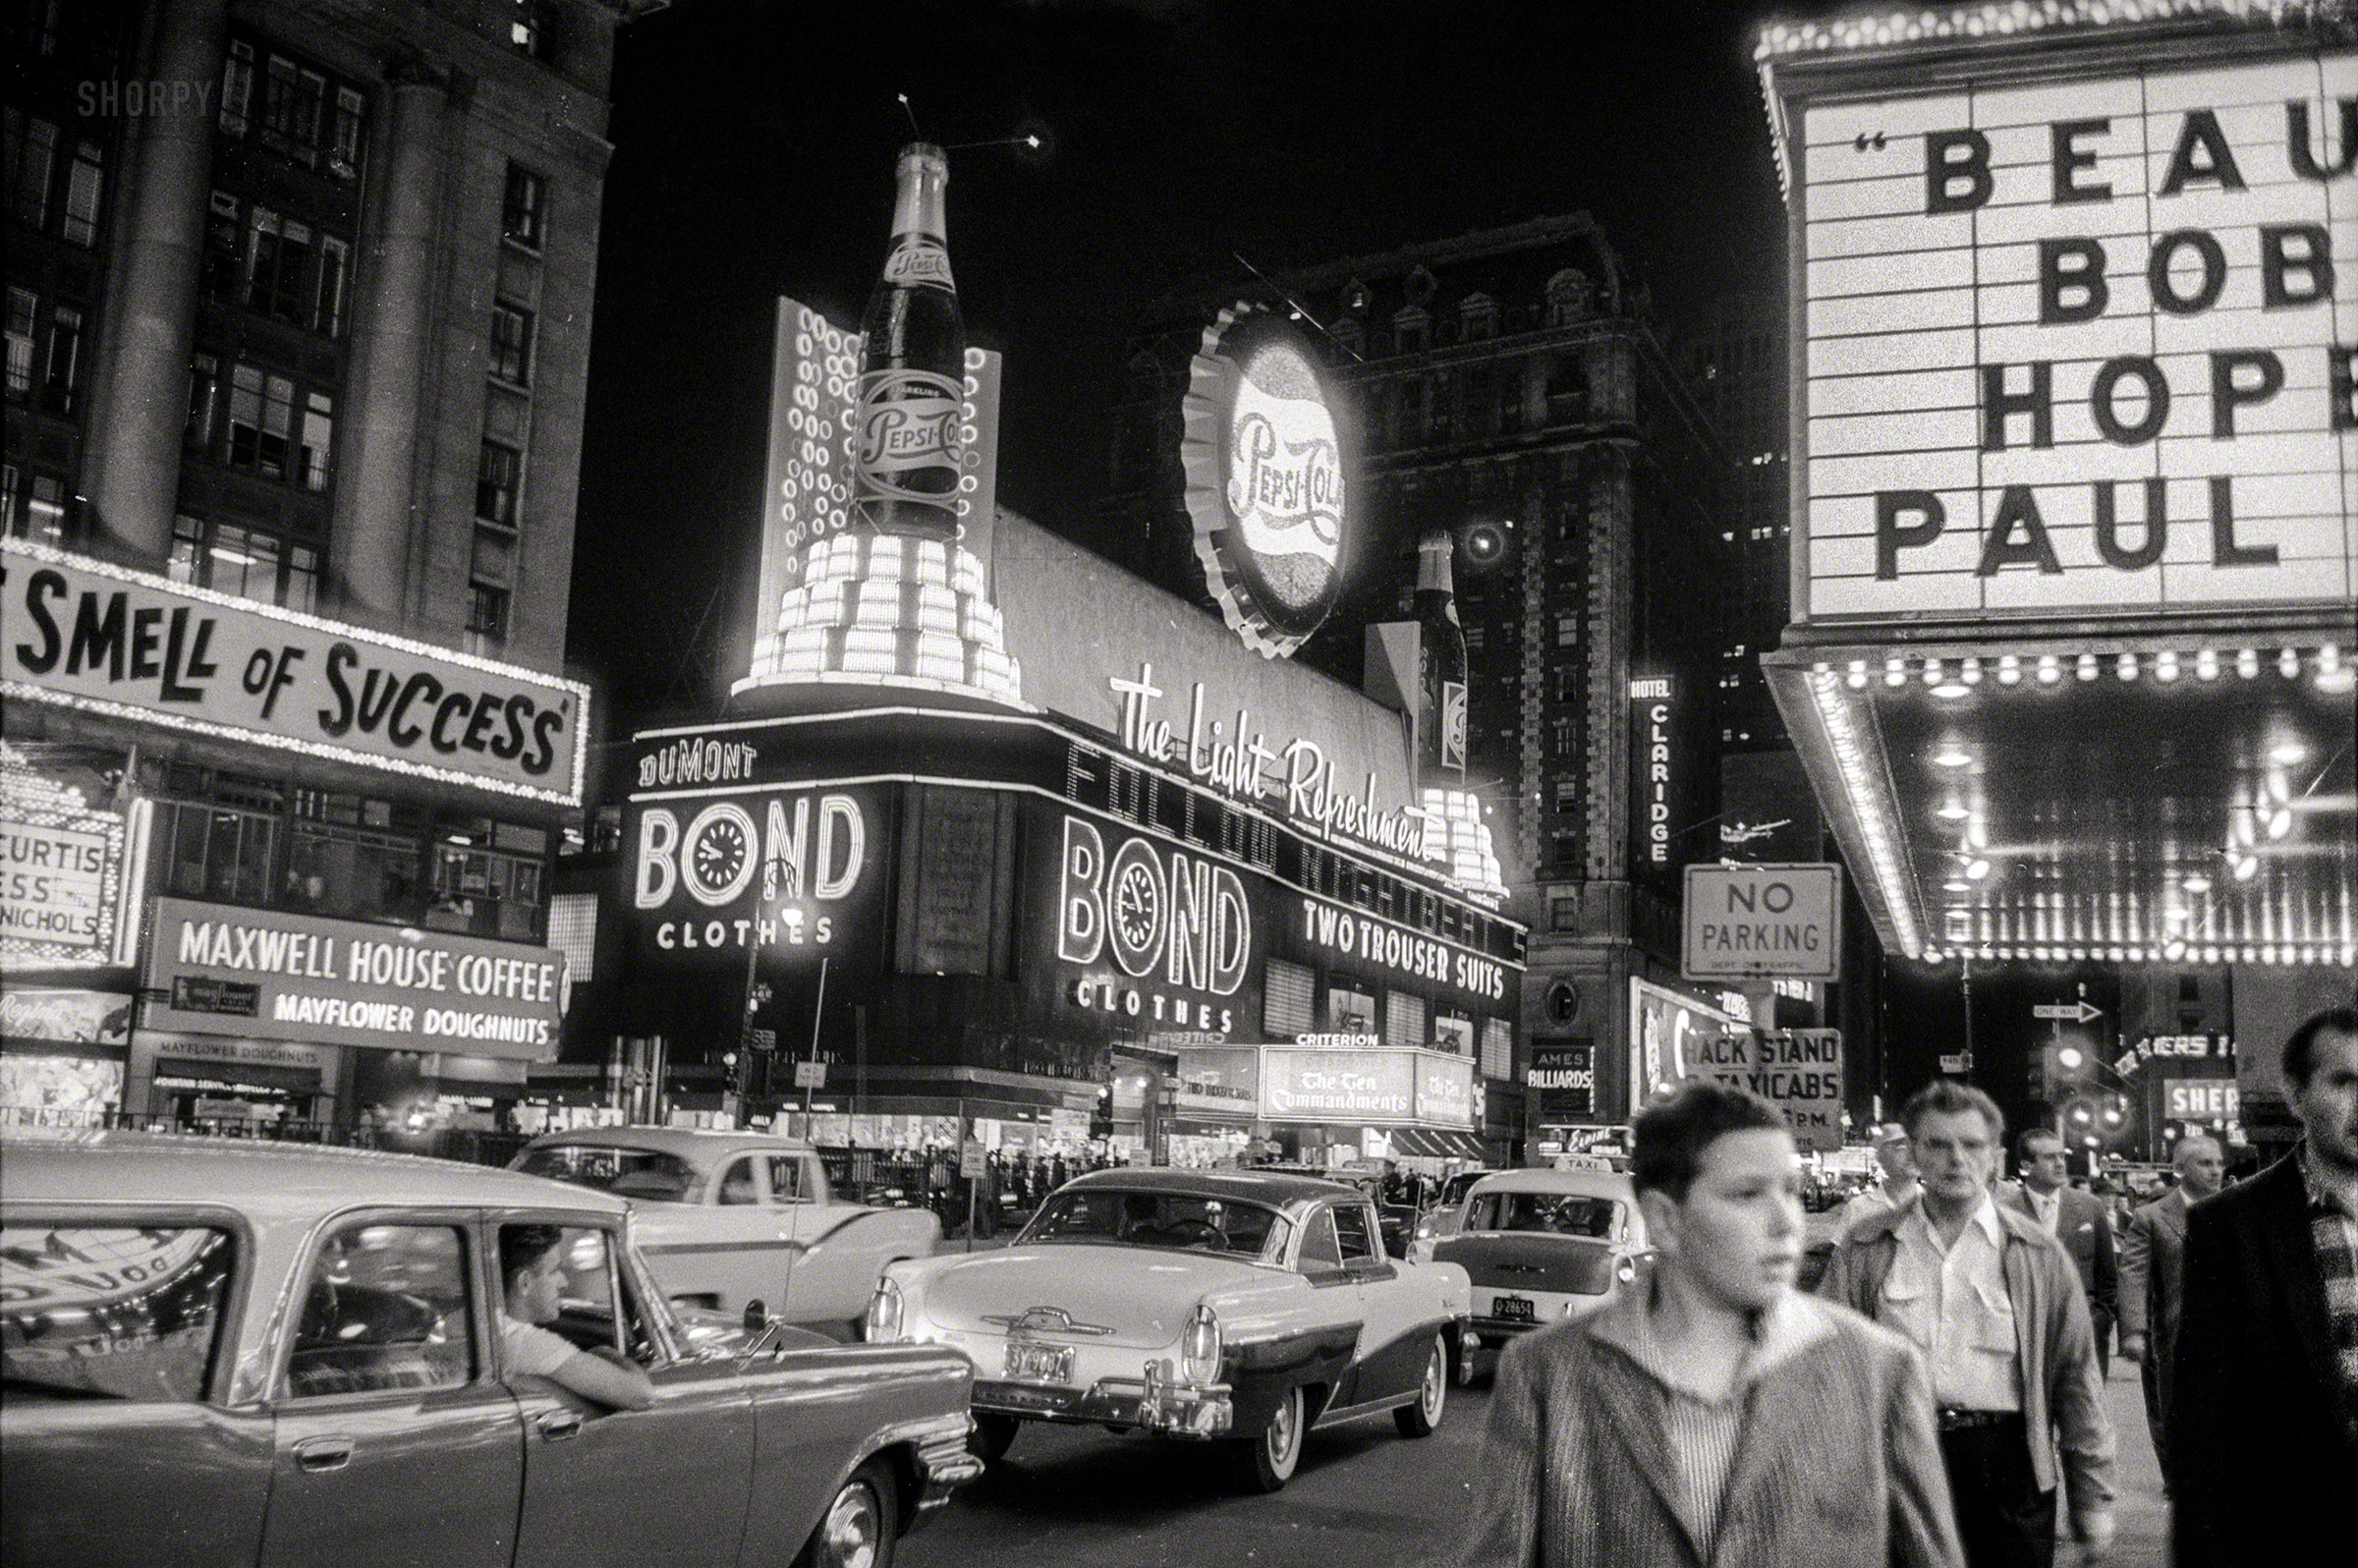 New York, 1957. "Broadway Theatre District -- Times Square at night." Now playing at Loew's State: "The Sweet Smell of Success." 35mm negative from the Look magazine photo archive. View full size.